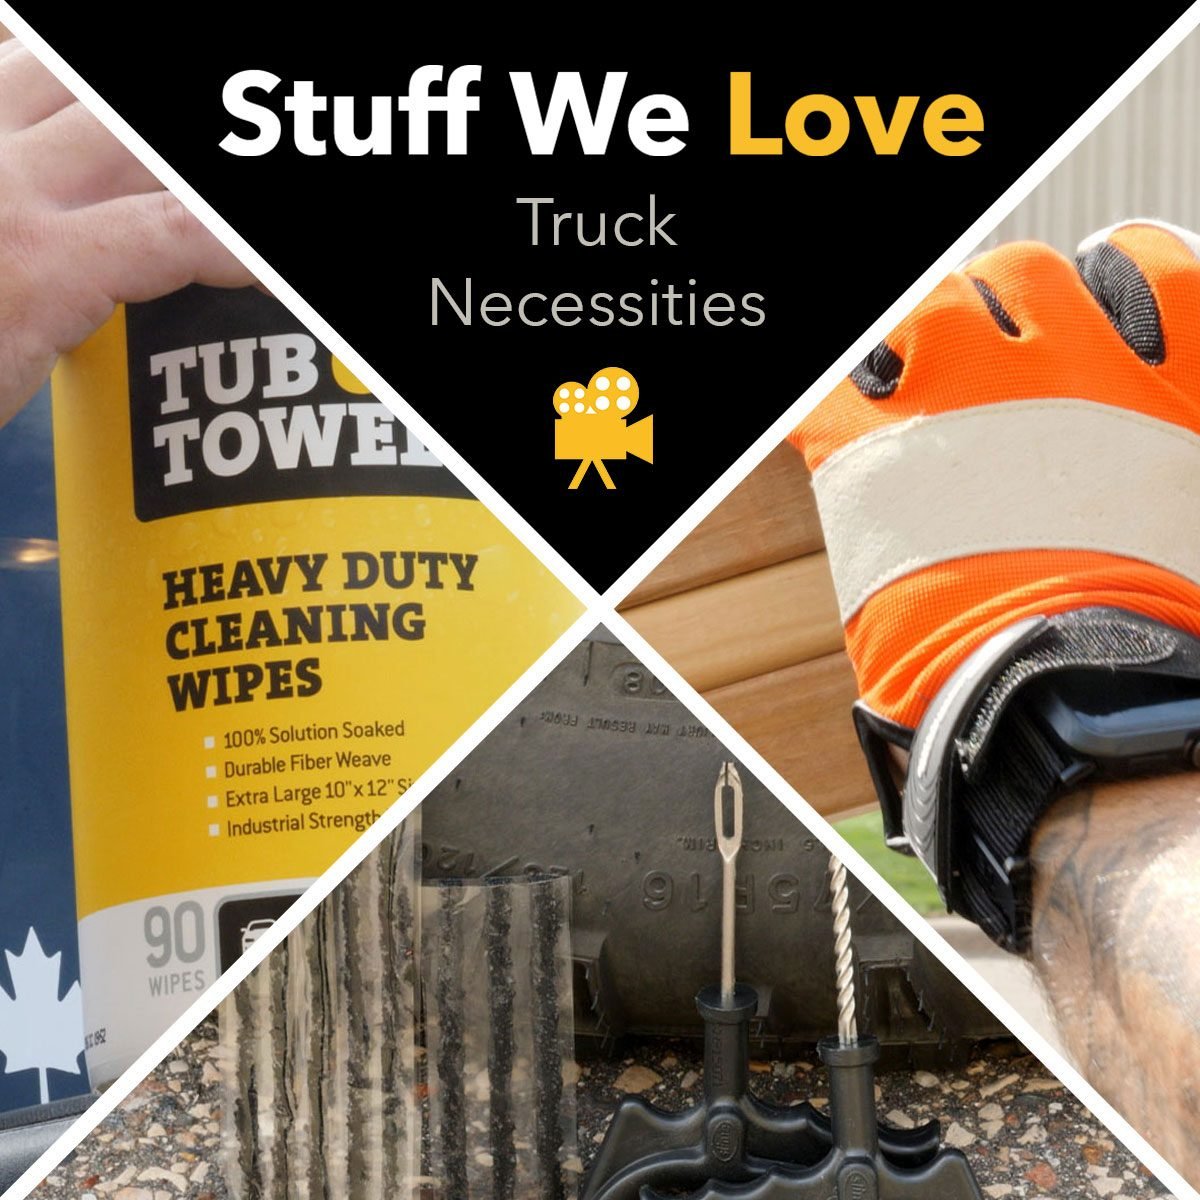 Stuff We Love: 7 Essentials You Should Always Have in Your Truck